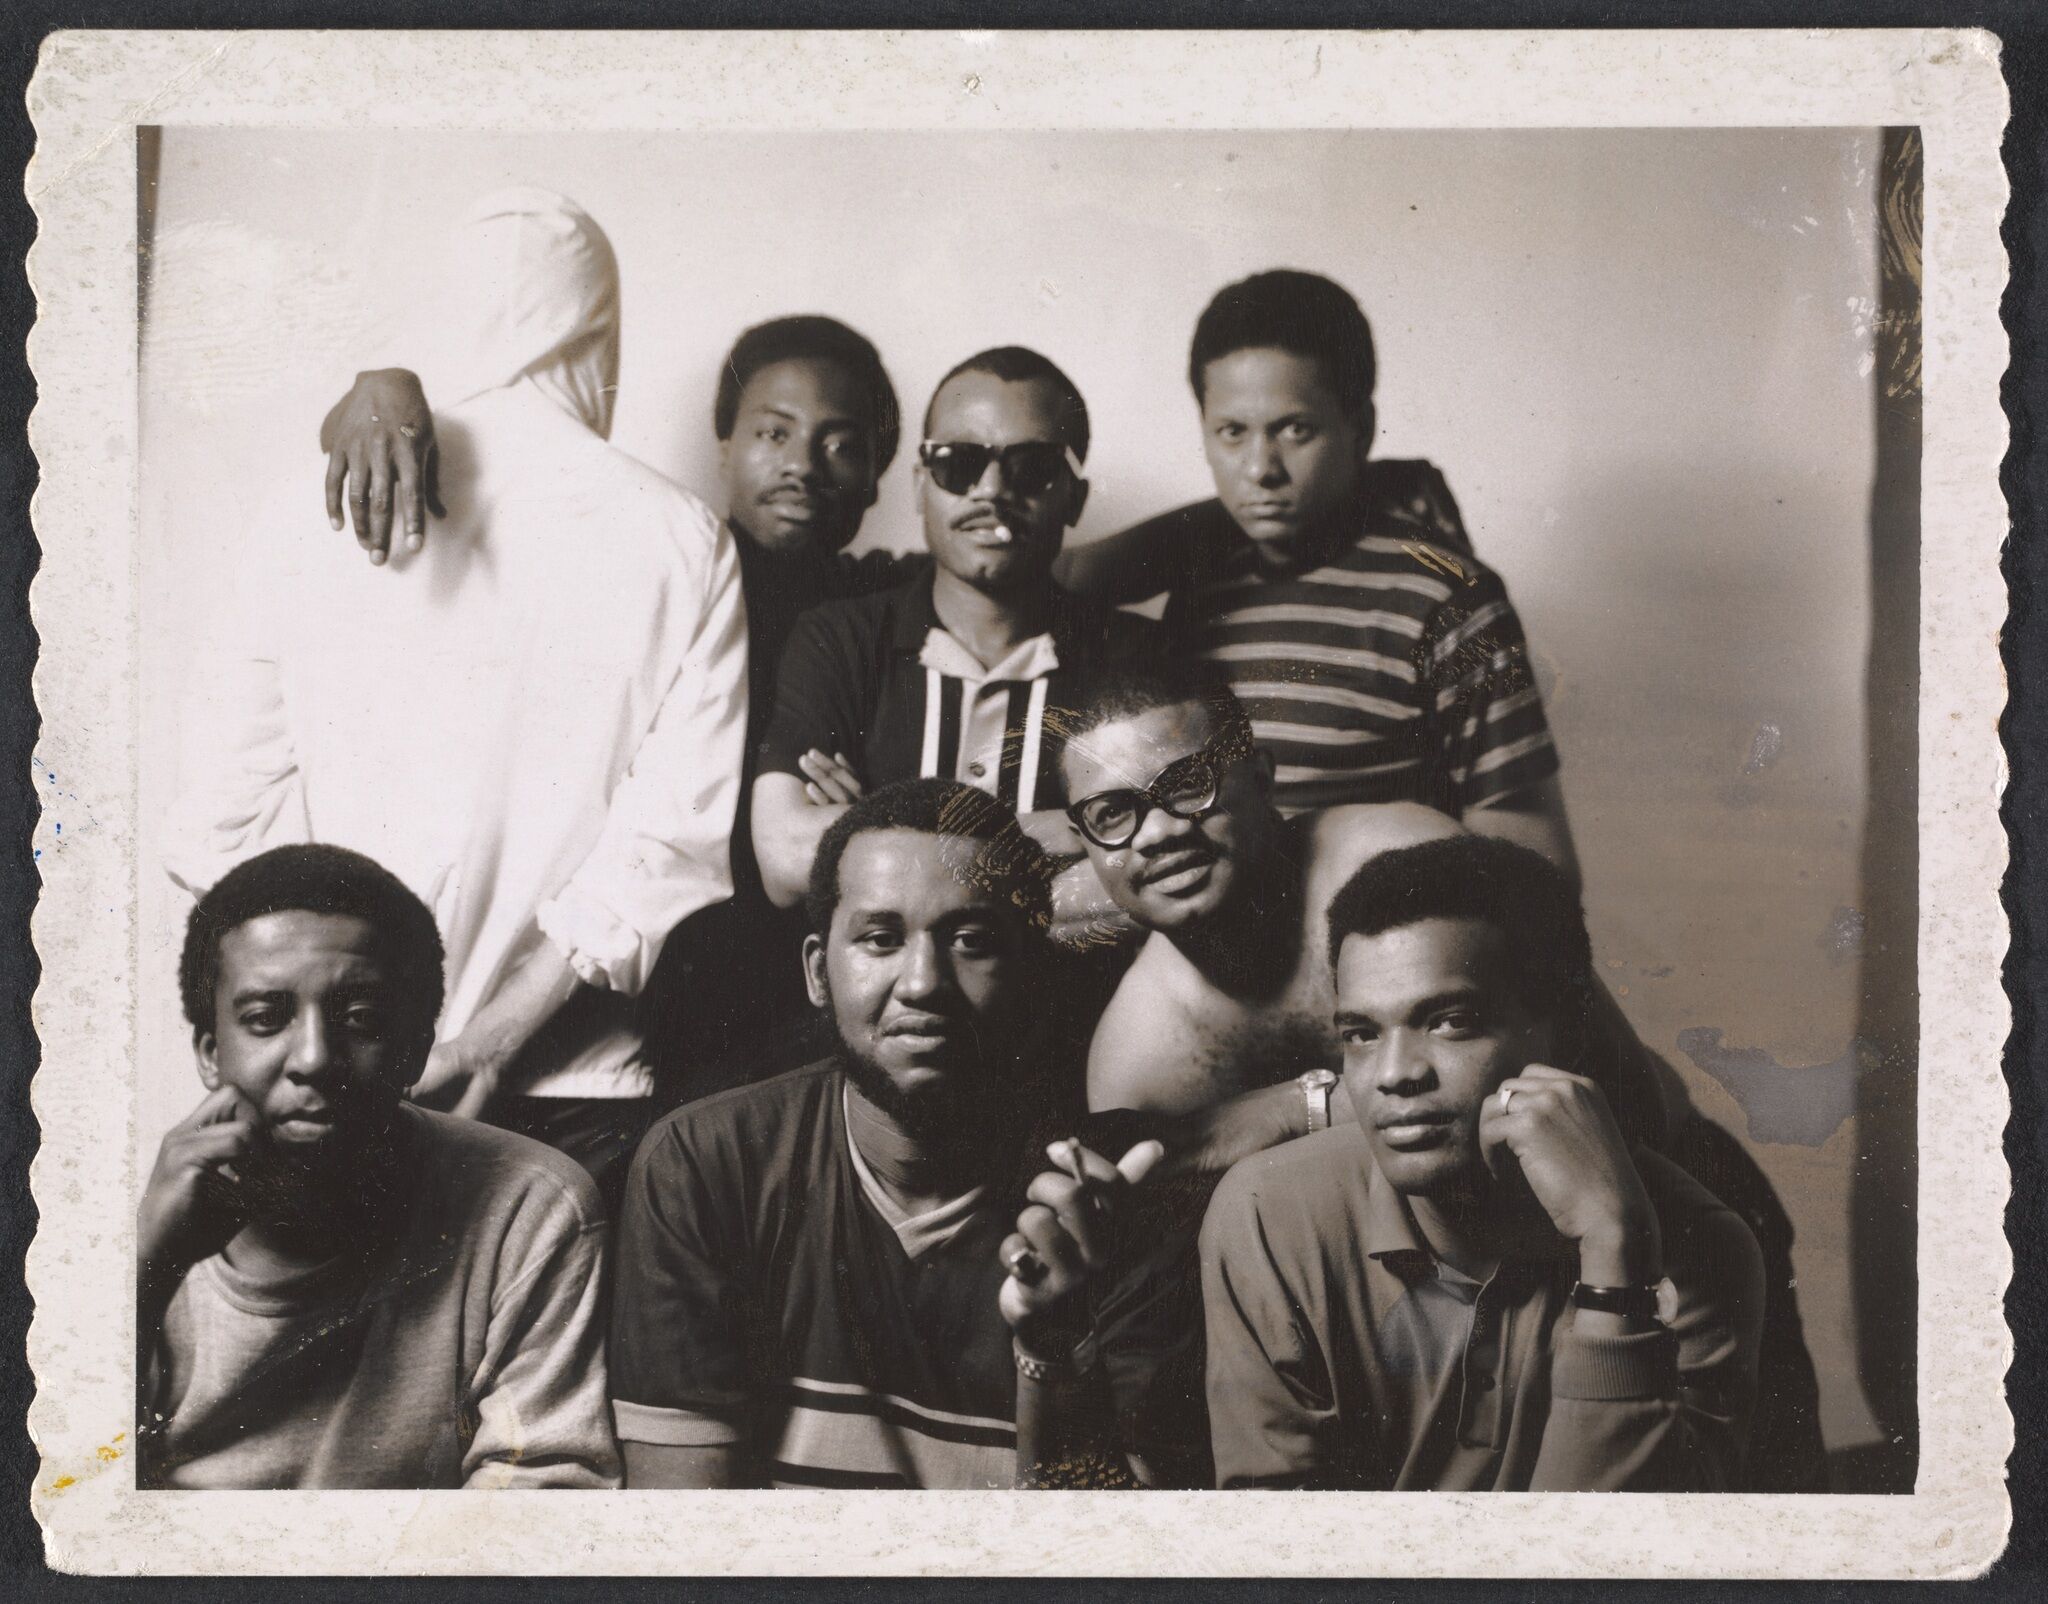 A group photograph of seven Black photographers.